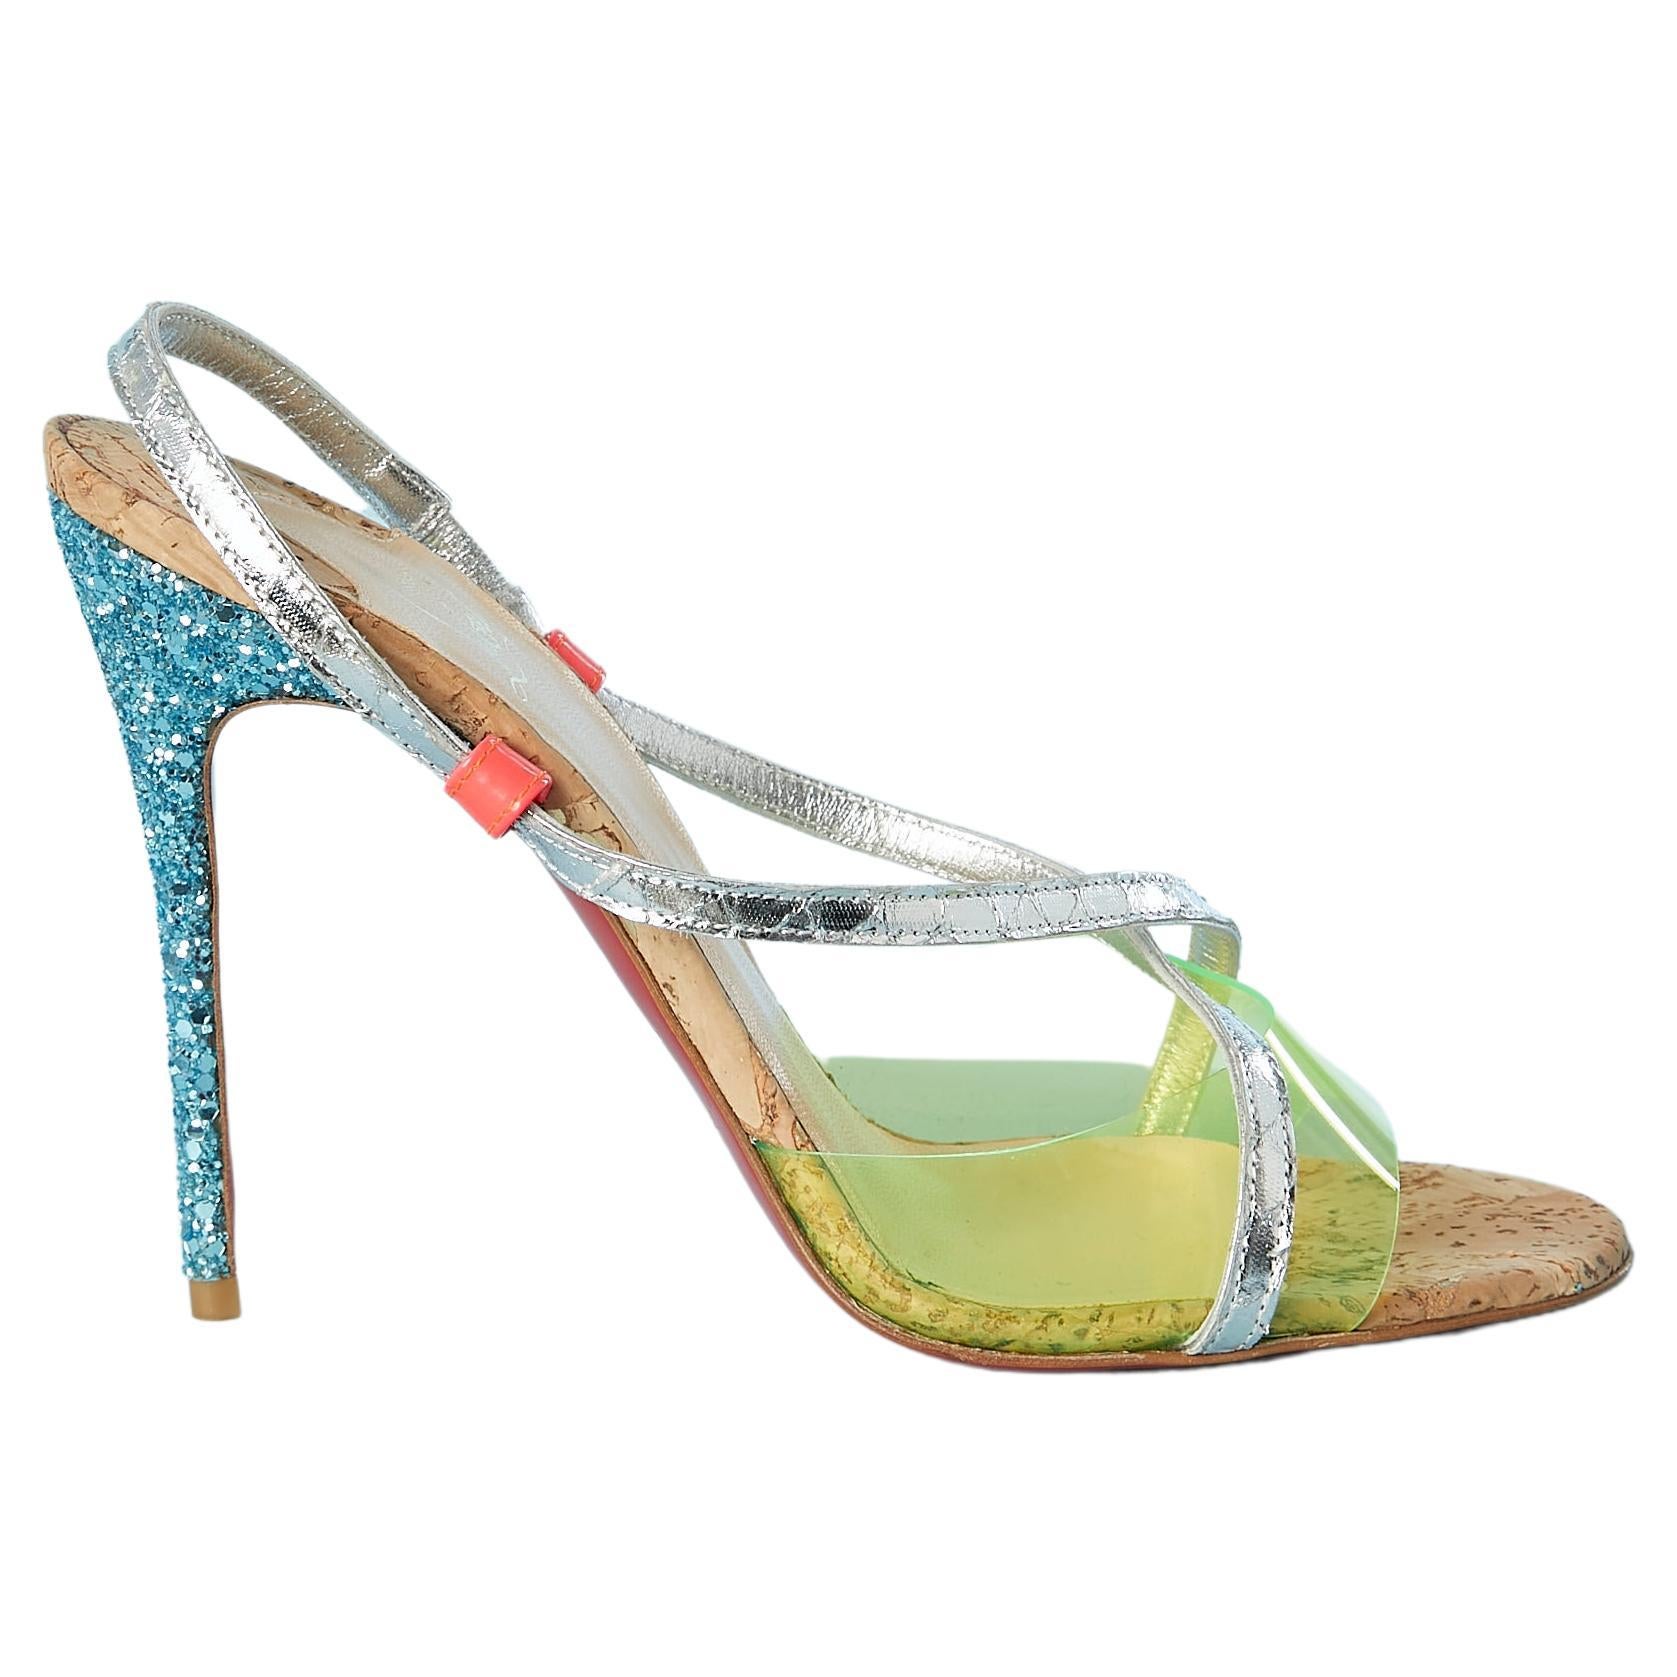 Sandal in silver leather, yellow PVC, glitters and cork Christian Louboutin  For Sale